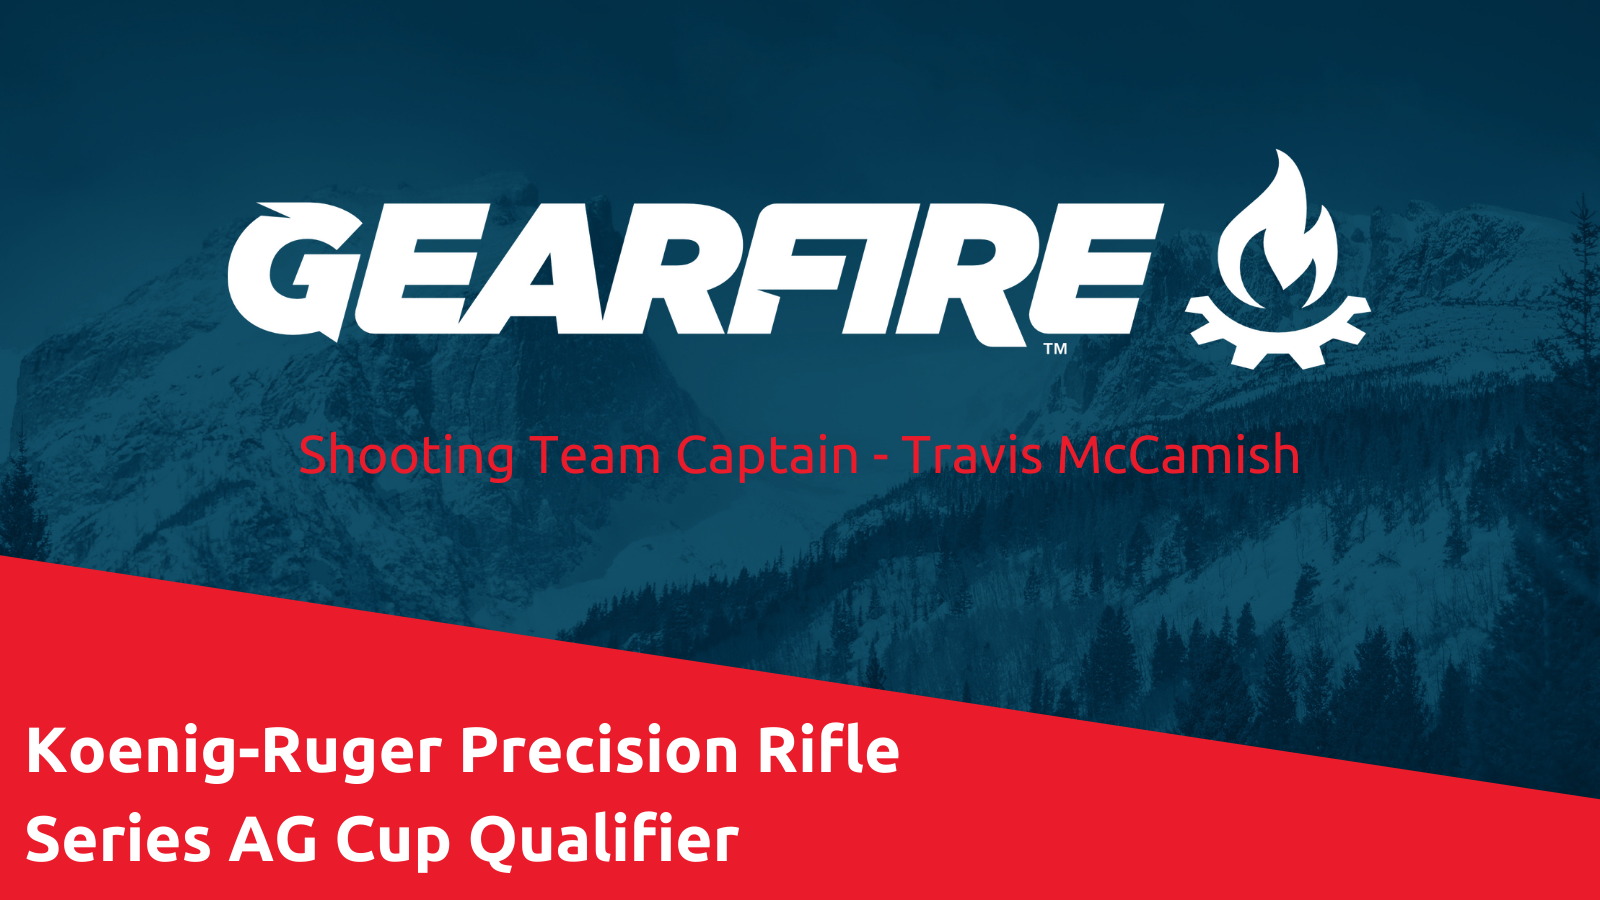 Gearfire’s Travis McCamish Captures First at Koenig-Ruger Precision Rifle Series AG Cup Qualifier featured img